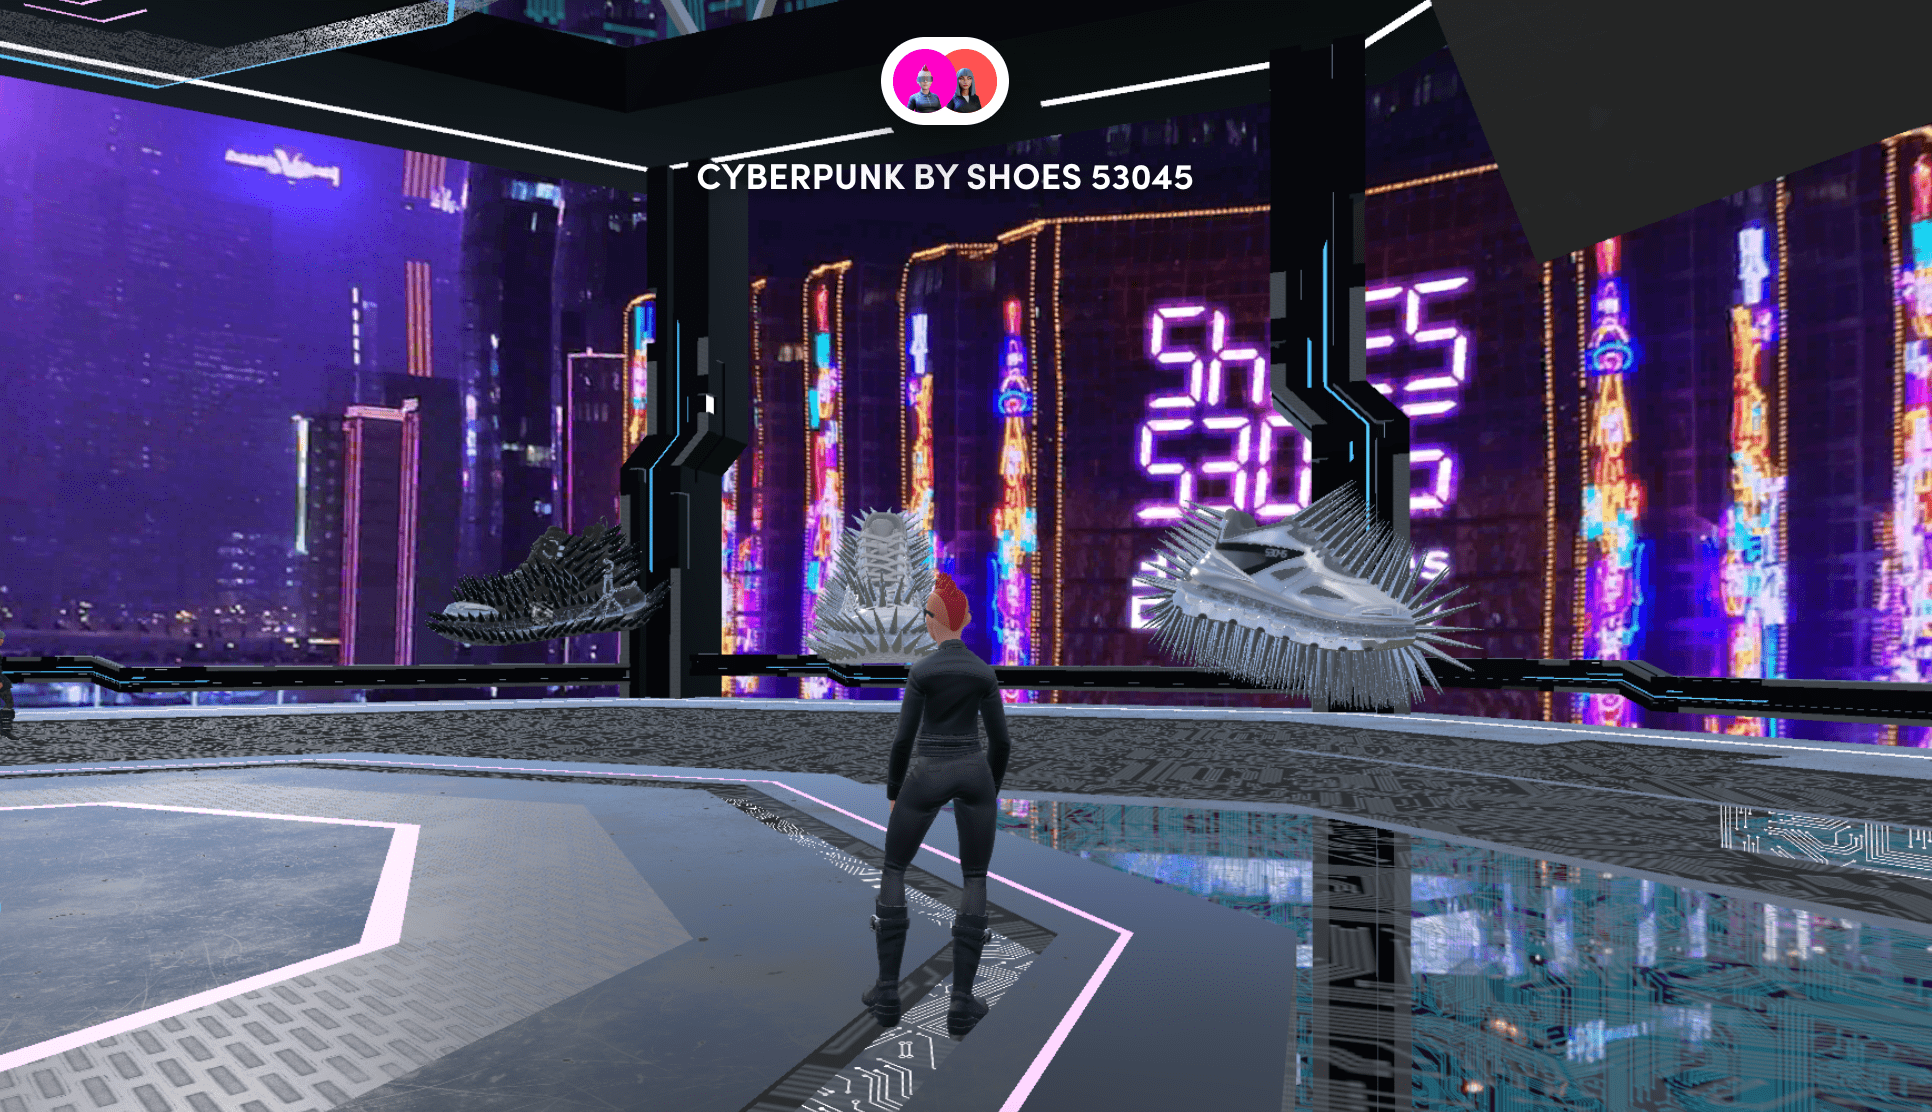 SHOES 53045 Cyberpunk Campaign banner - Spatial.io promotional banner for Cyberpunk virtual shoes gallery